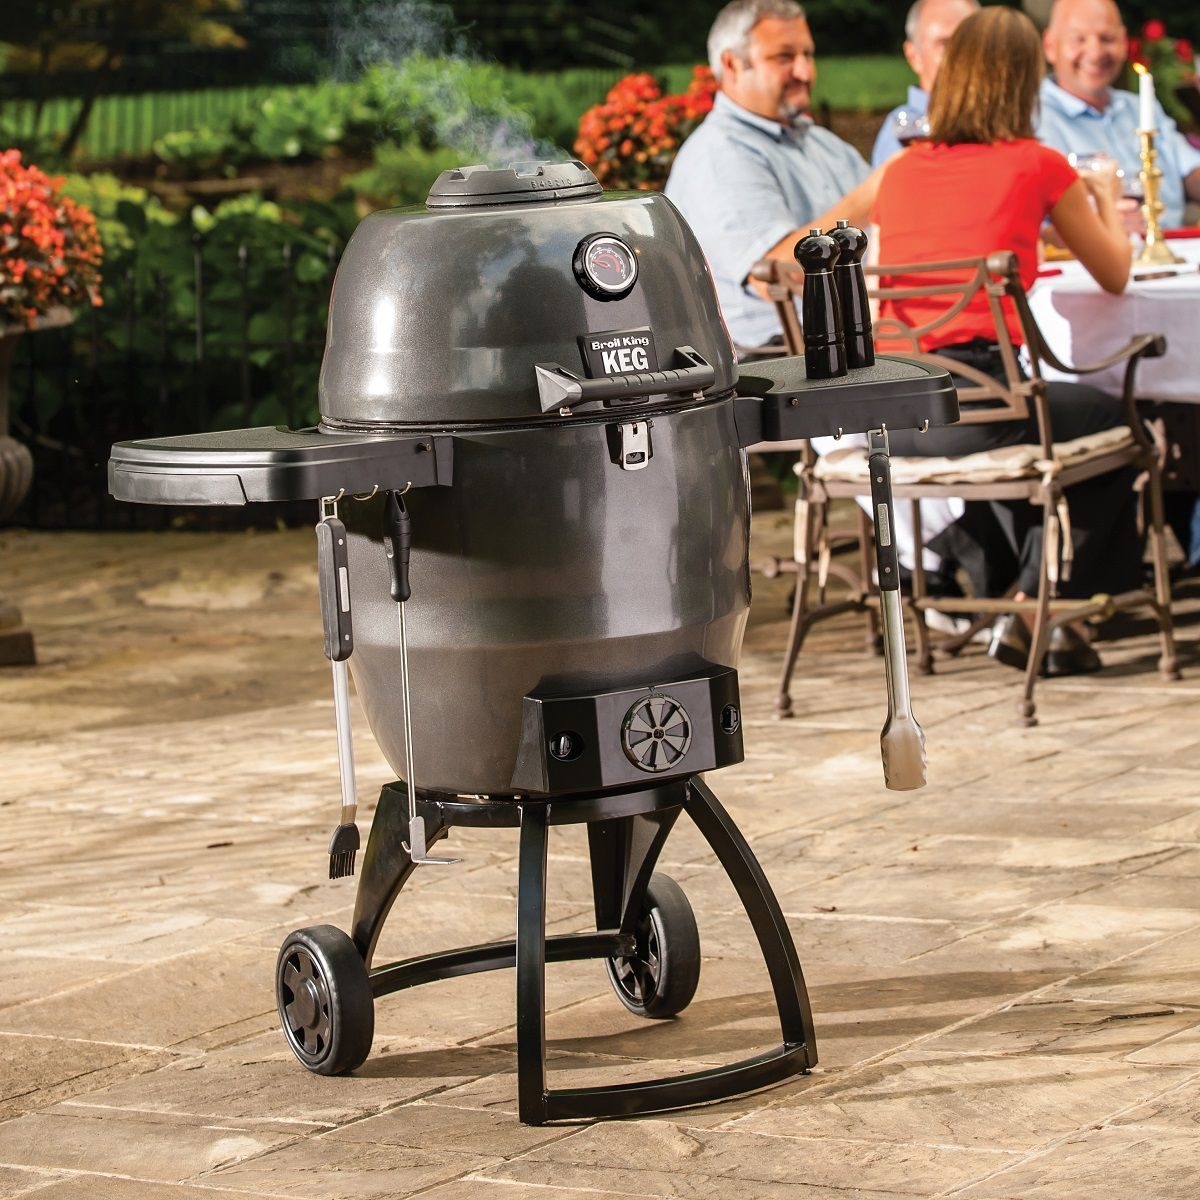 Black Charcoal Grill with Double-Walled Steel Body